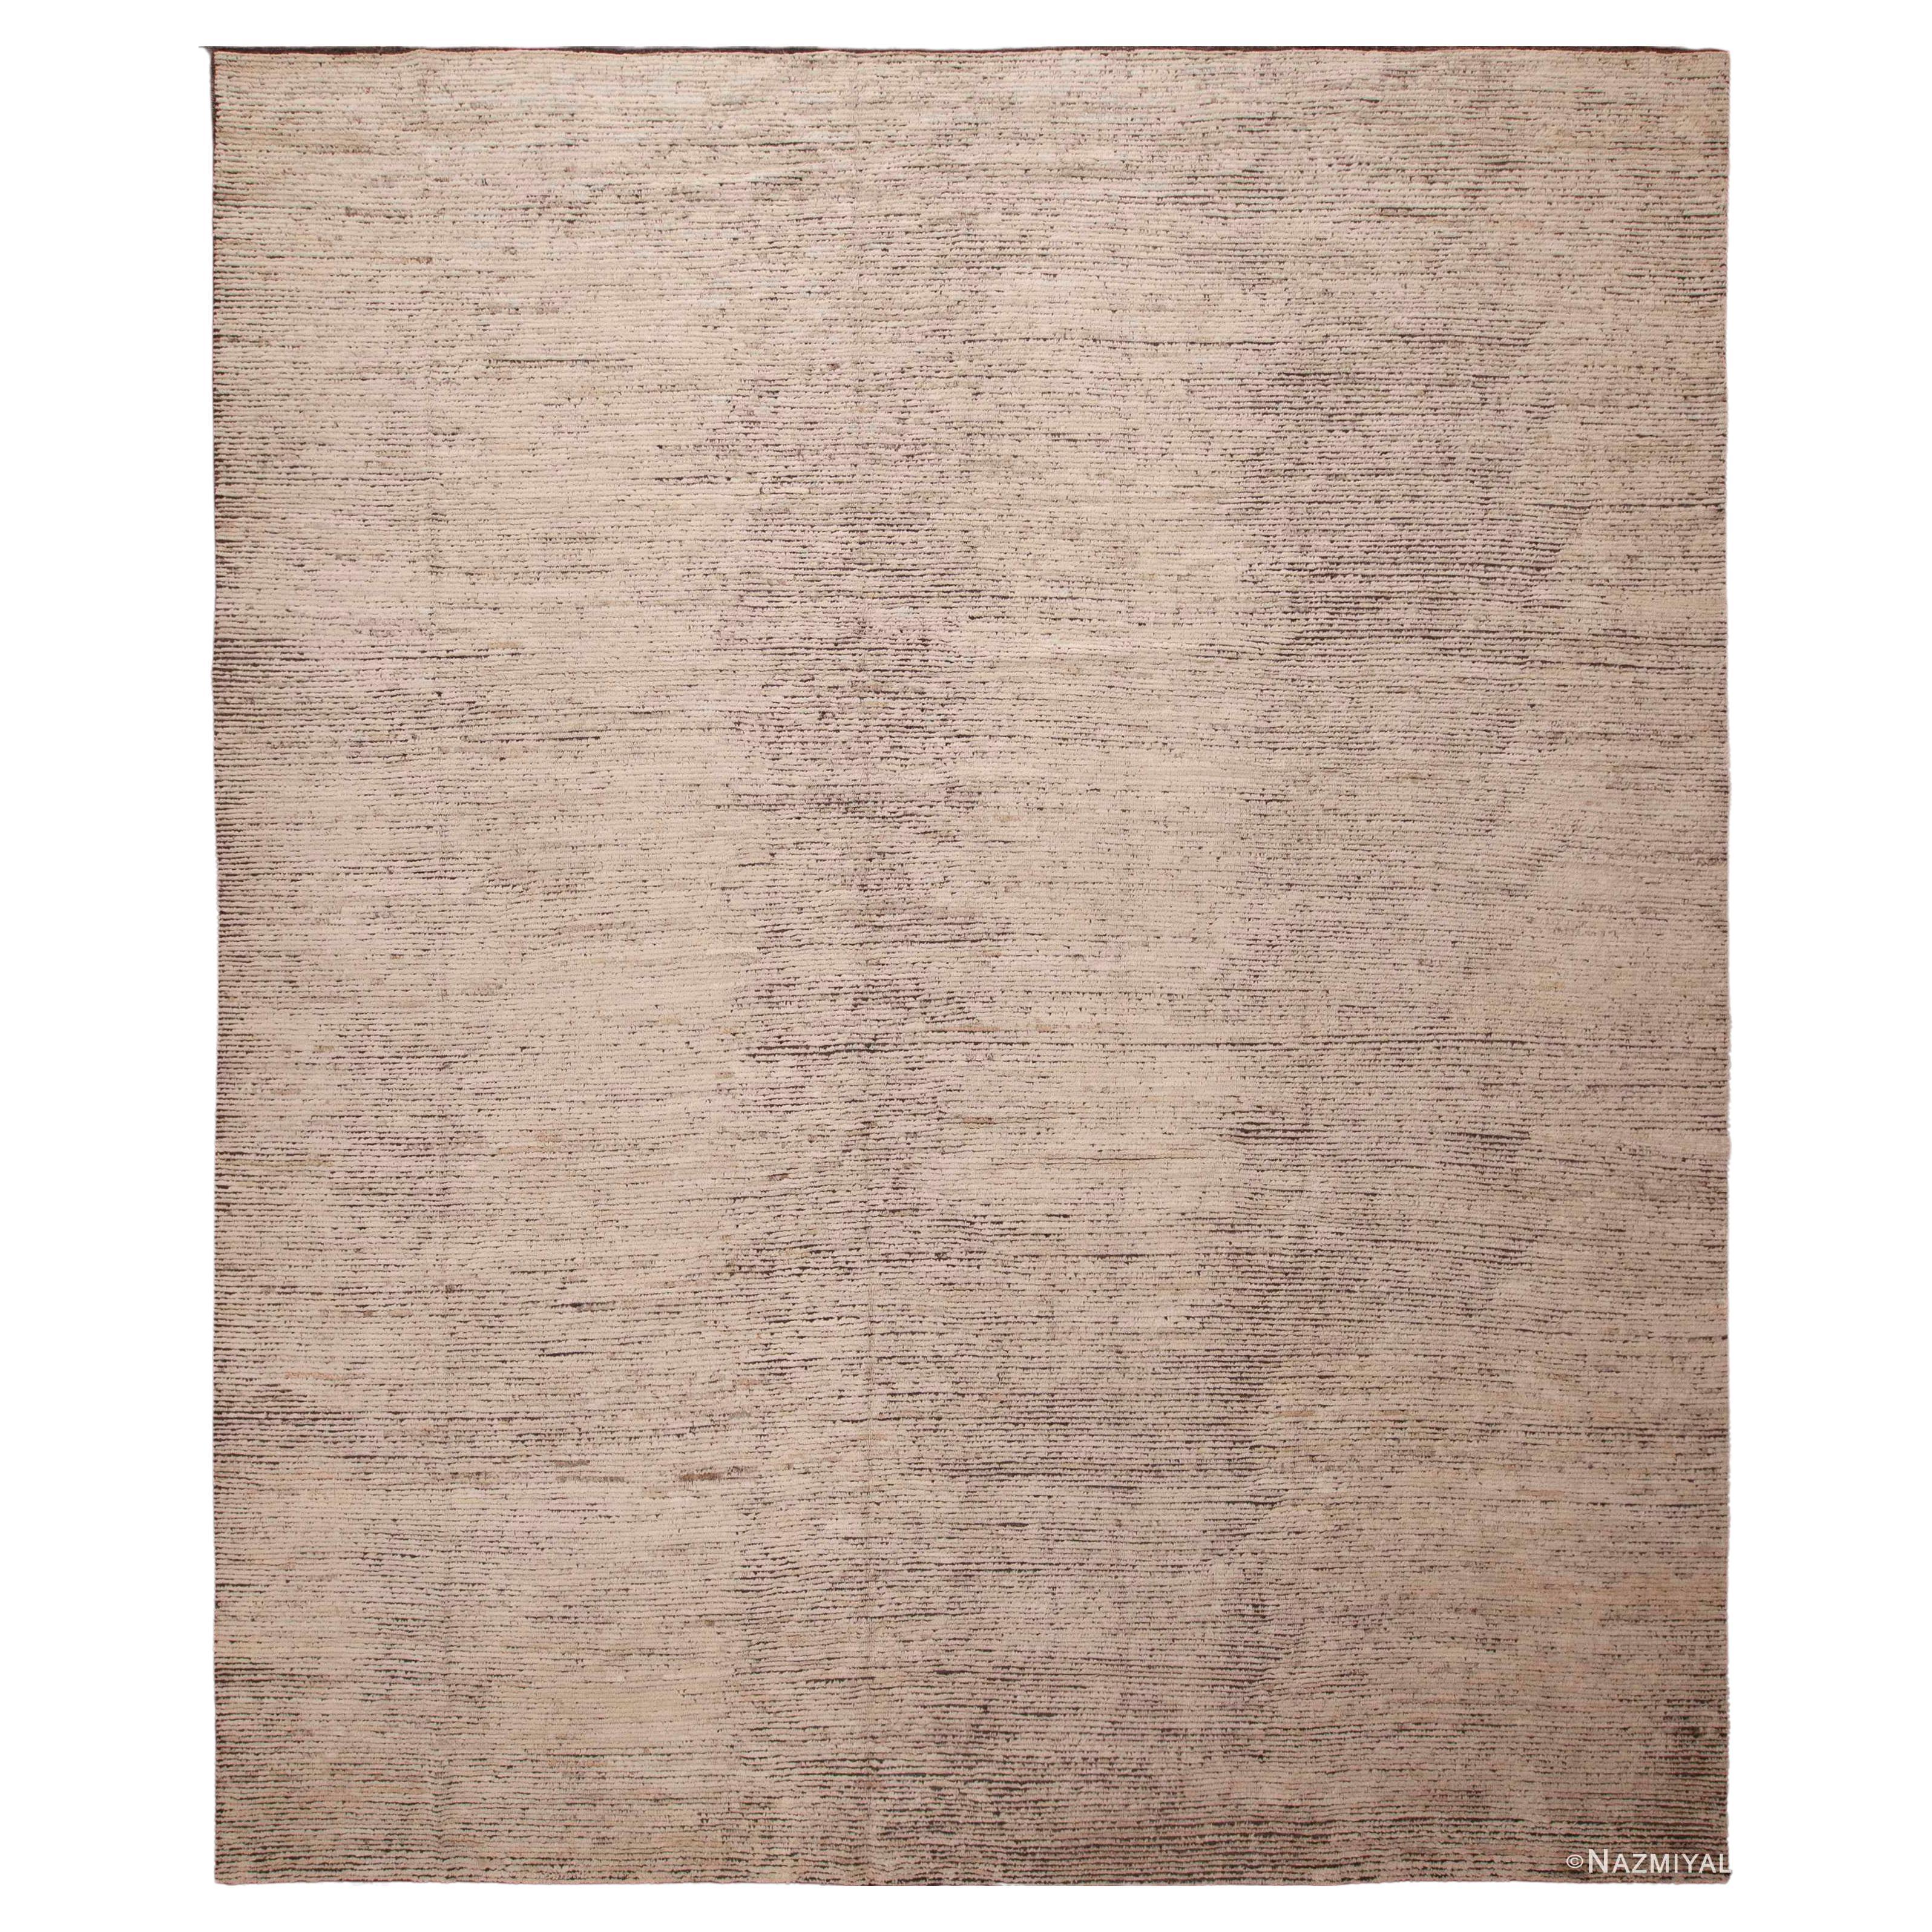 Nazmiyal Collection Abstract Modern Wool Pile Room Size Area Rug 12'3" x 14'6" For Sale